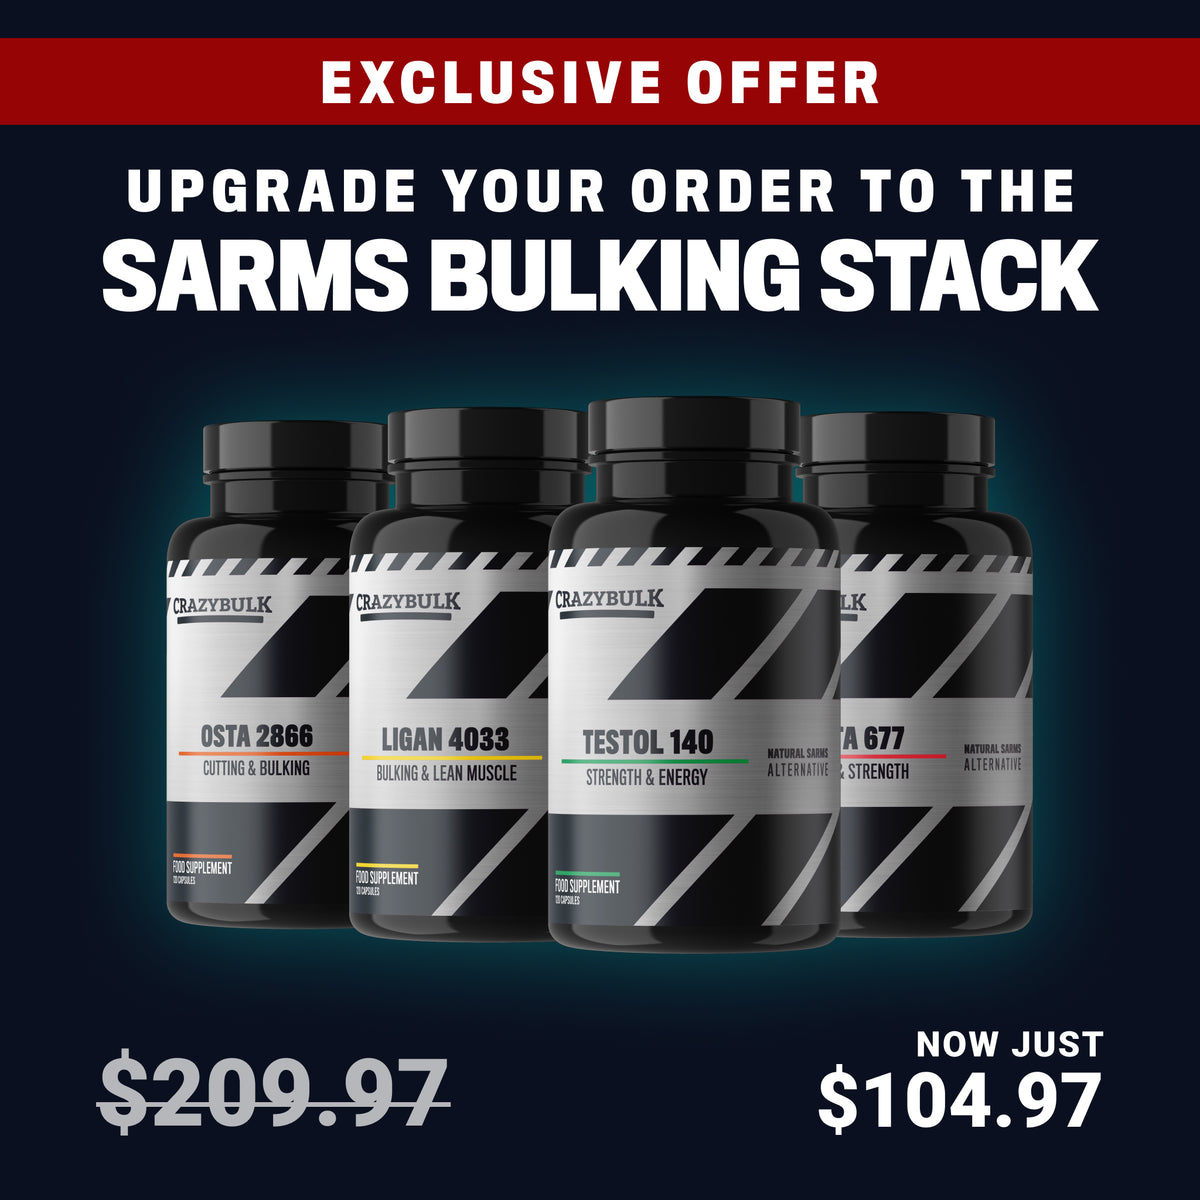 Exclusive Offer Upgrade To The Sarms Bulking Stack Crazybulk Usa 3286